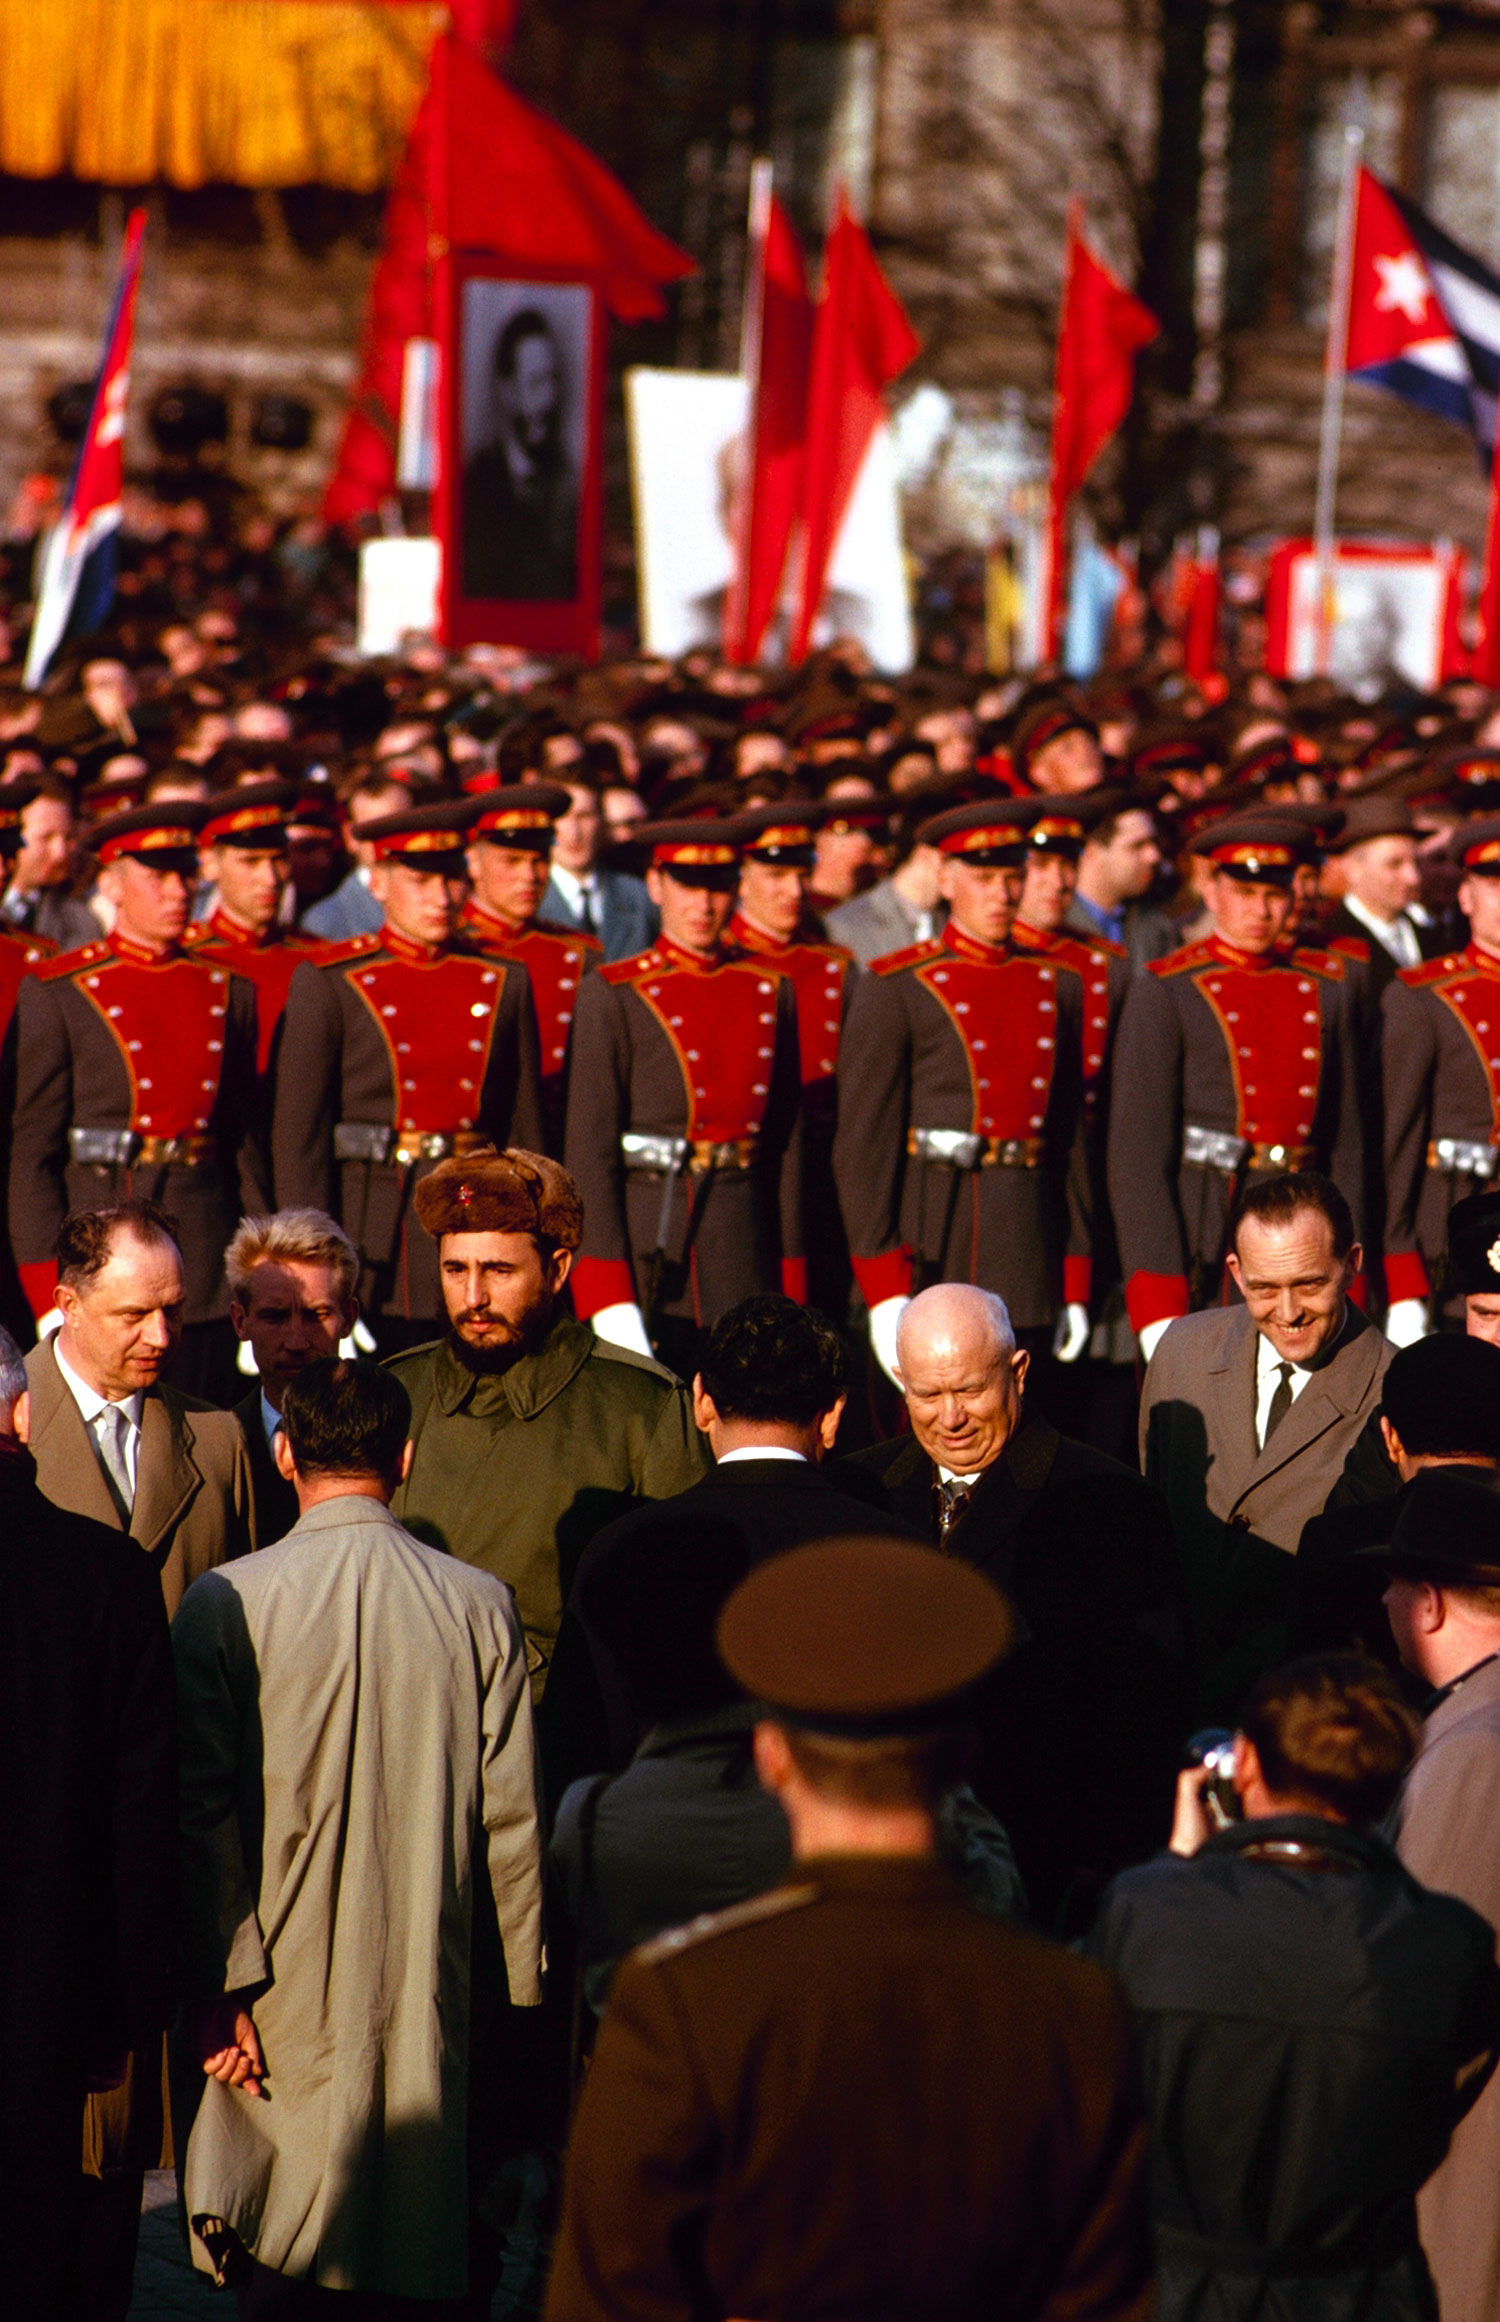 Cuban leader Fidel Castro and Nikita Khrushchev, May Day celebration, Moscow, 1963.